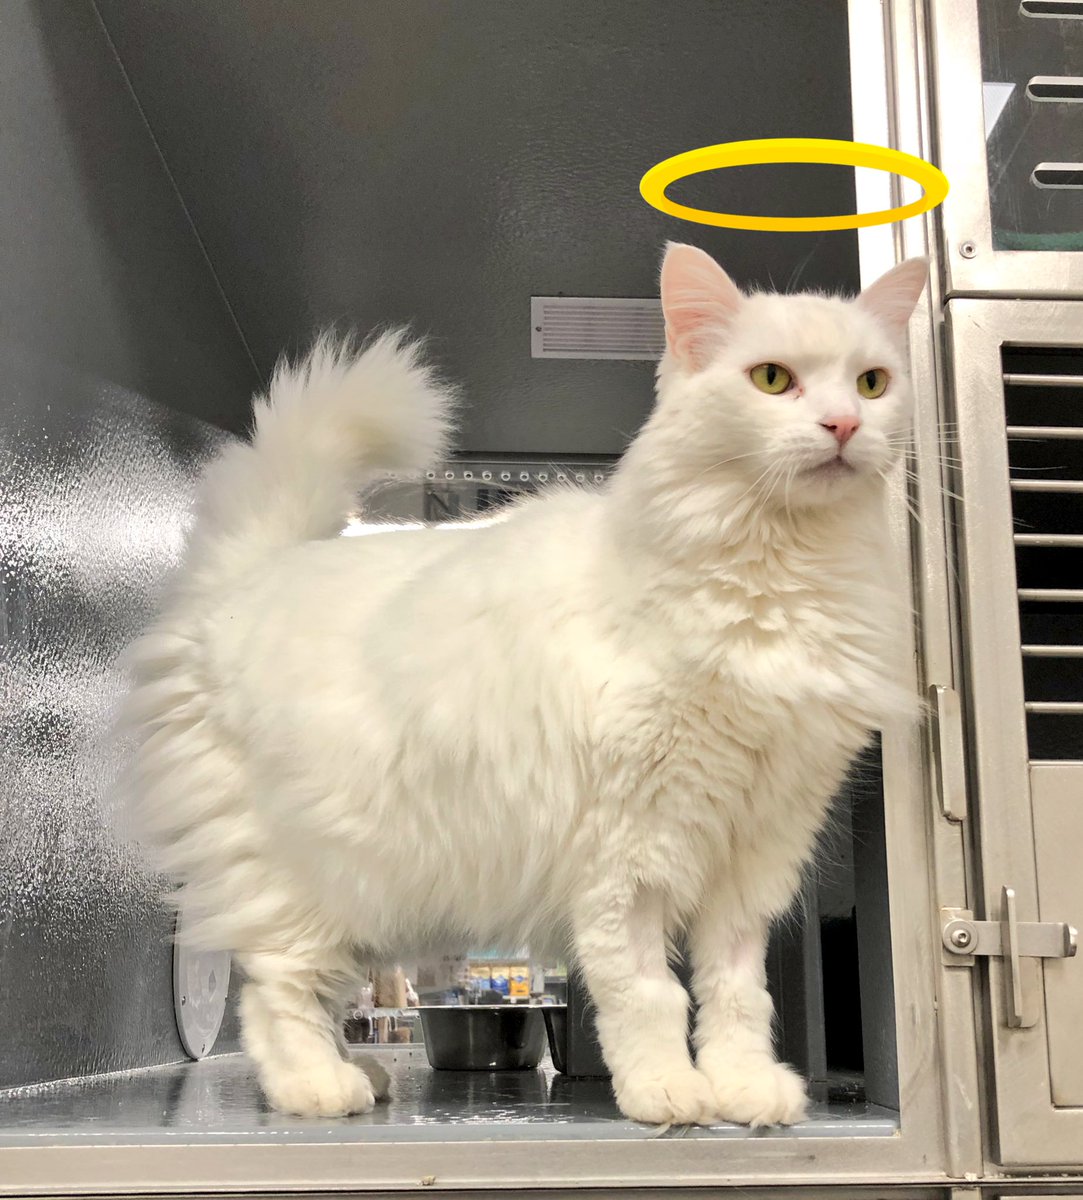 ❤️Angel is in need of a comfy place to call home. Come by the store today to meet her and see if she’s your match! Angel is a 10 yr old domestic medium hair cat who loves people. ❤️
#nationaladoptionweekend #PicMe #angel #Cat #Brampton